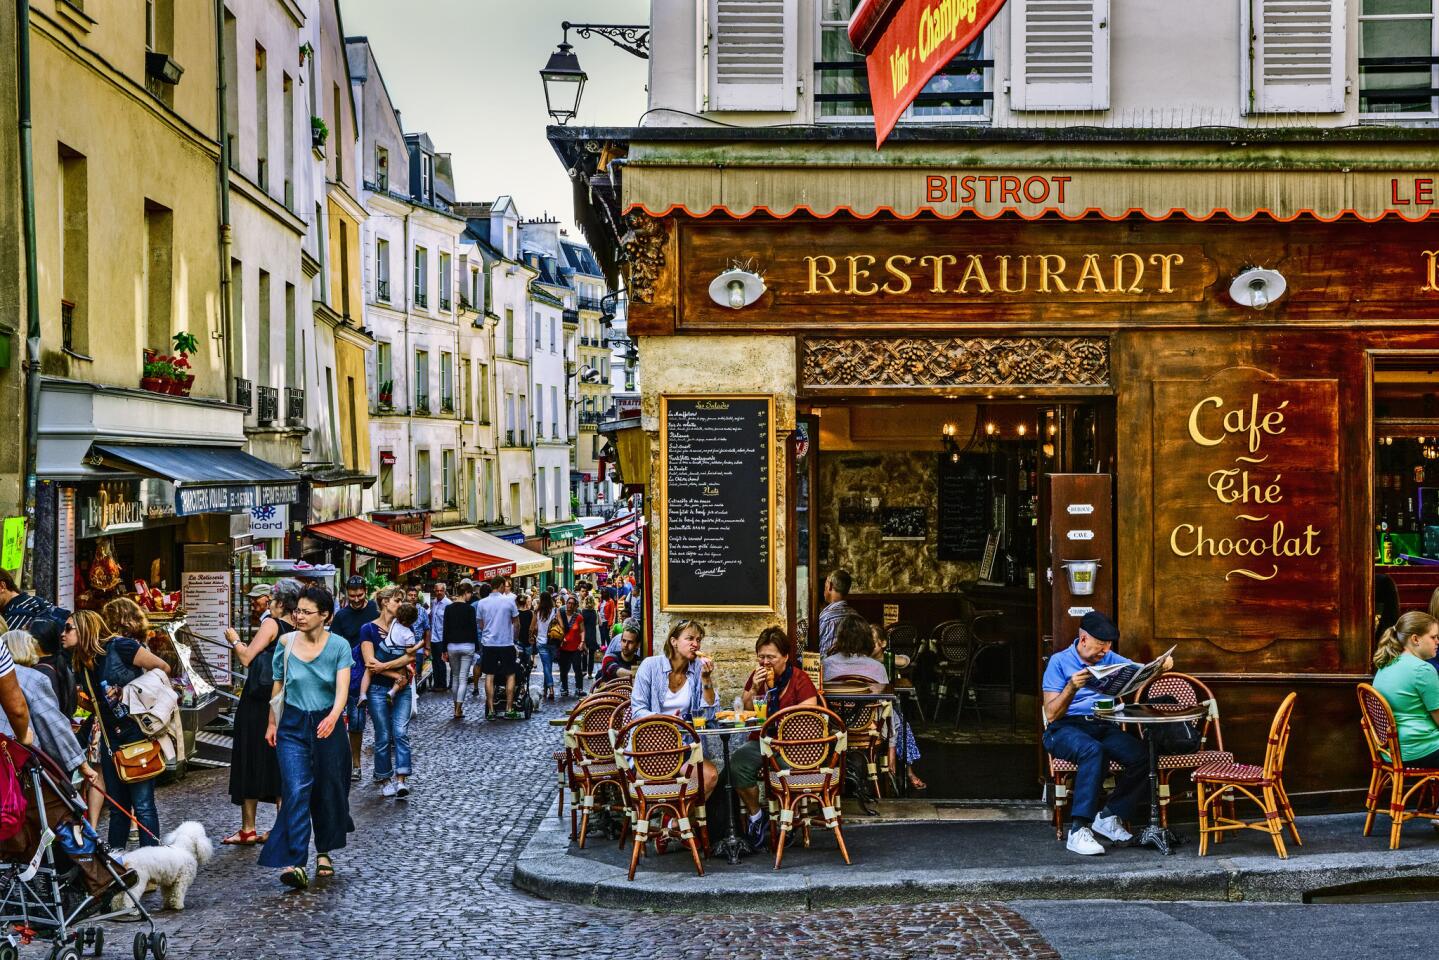 Shops and bistros in Mouffetard Street, Paris. The best way to explore the city's arrondissements is on foot. Just don't wear sneakers.